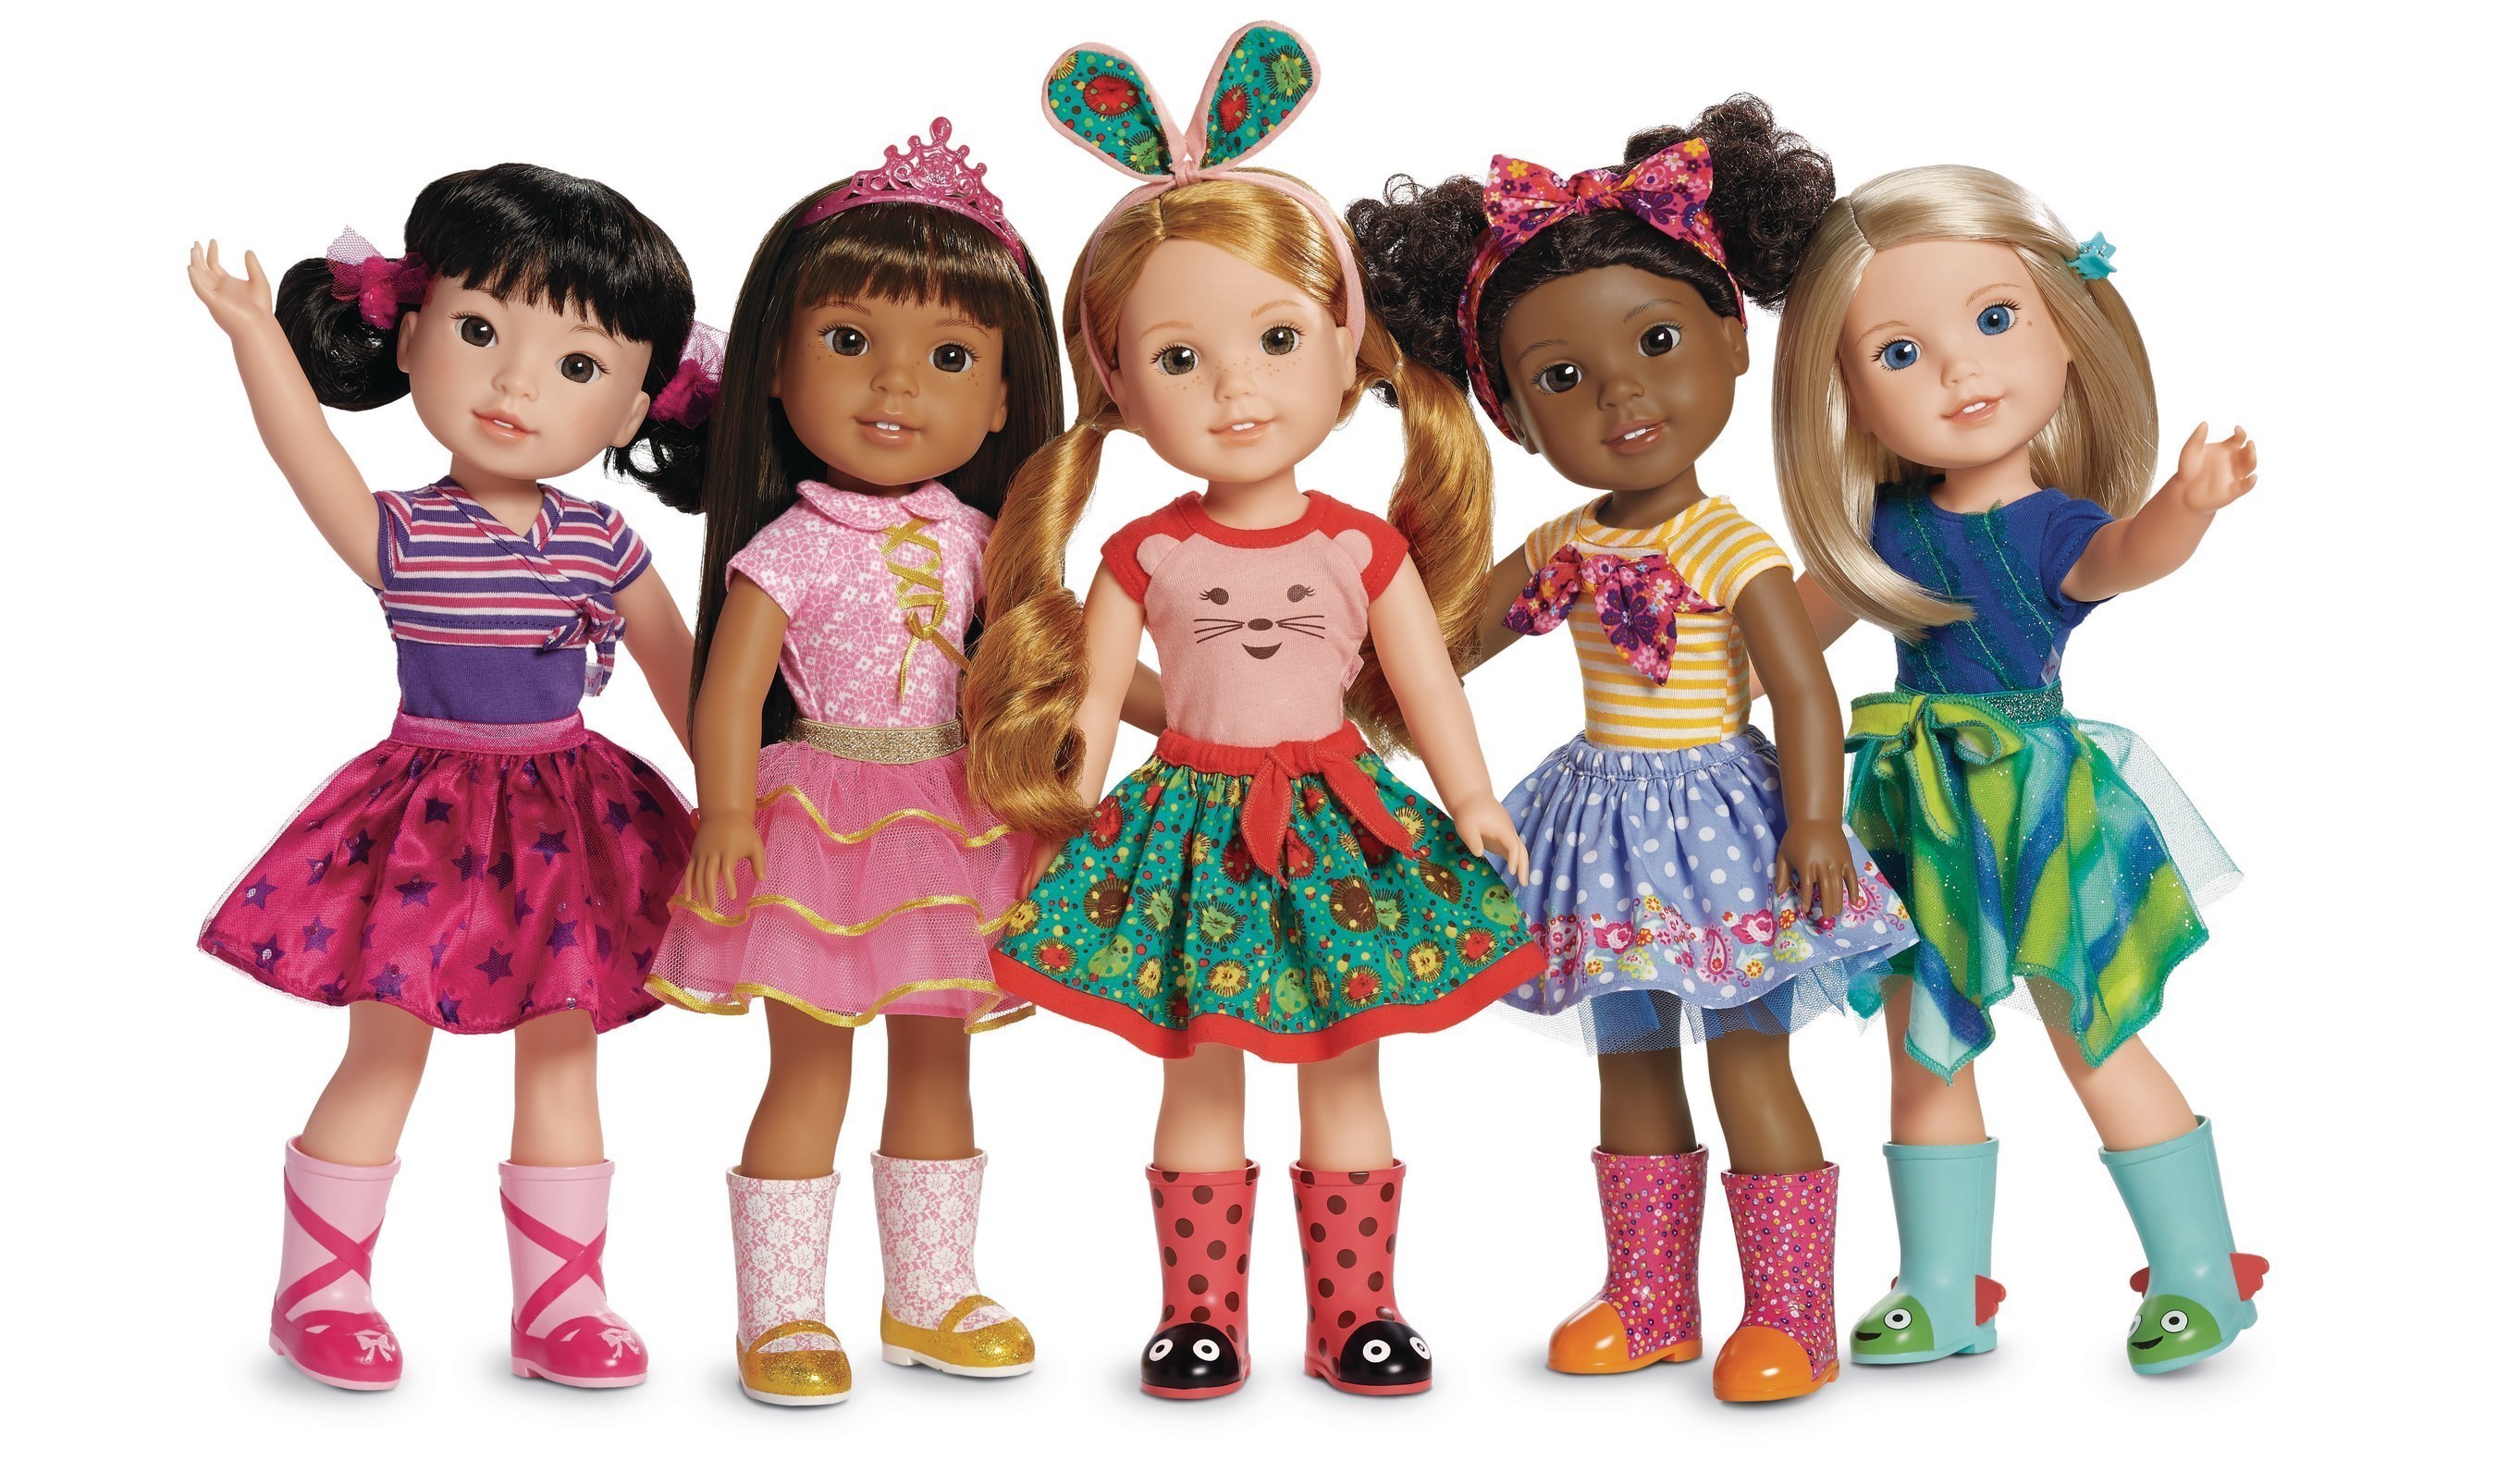 American Girl debuts new WellieWishers line for girls ages 5 to 7.